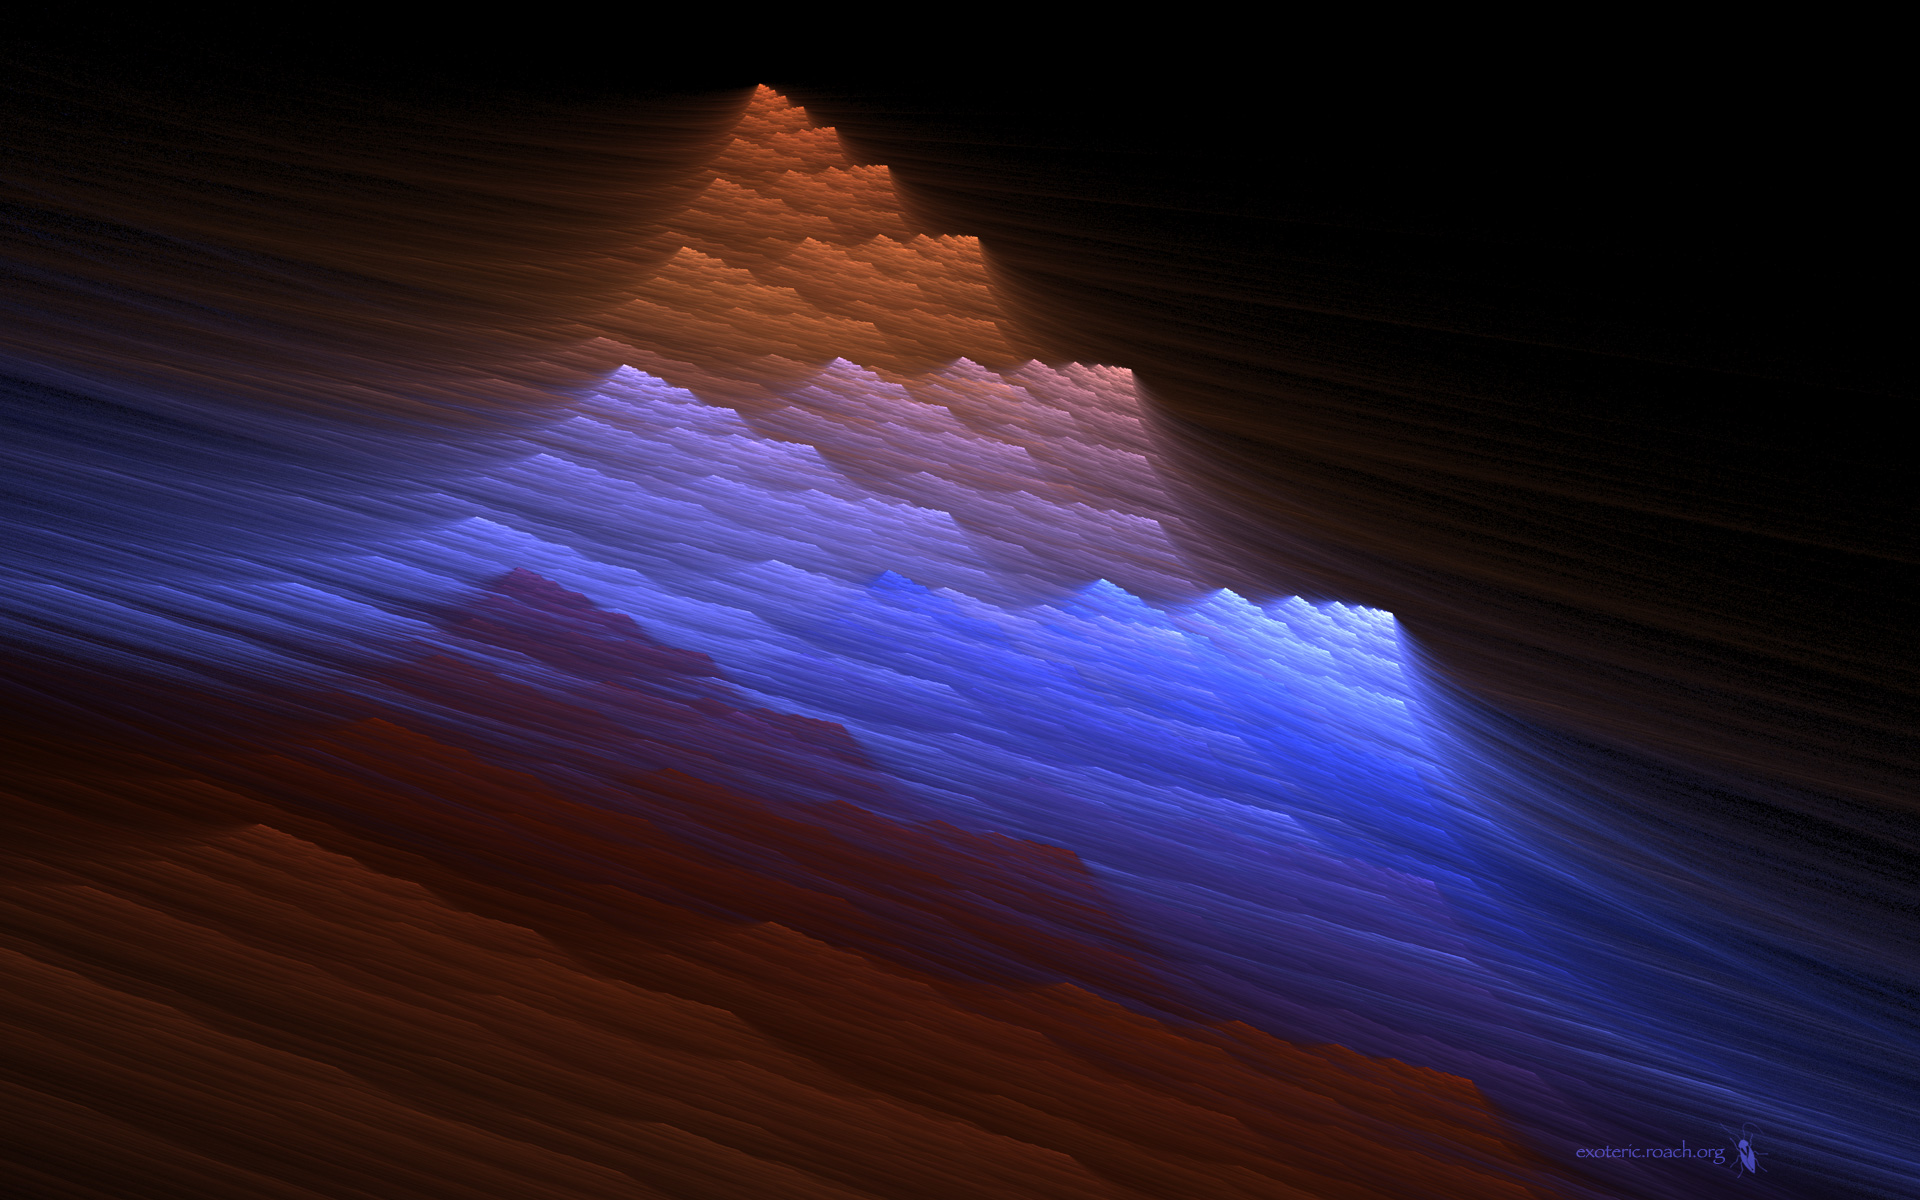 CGI peak and dune in textured pattern and shapes.